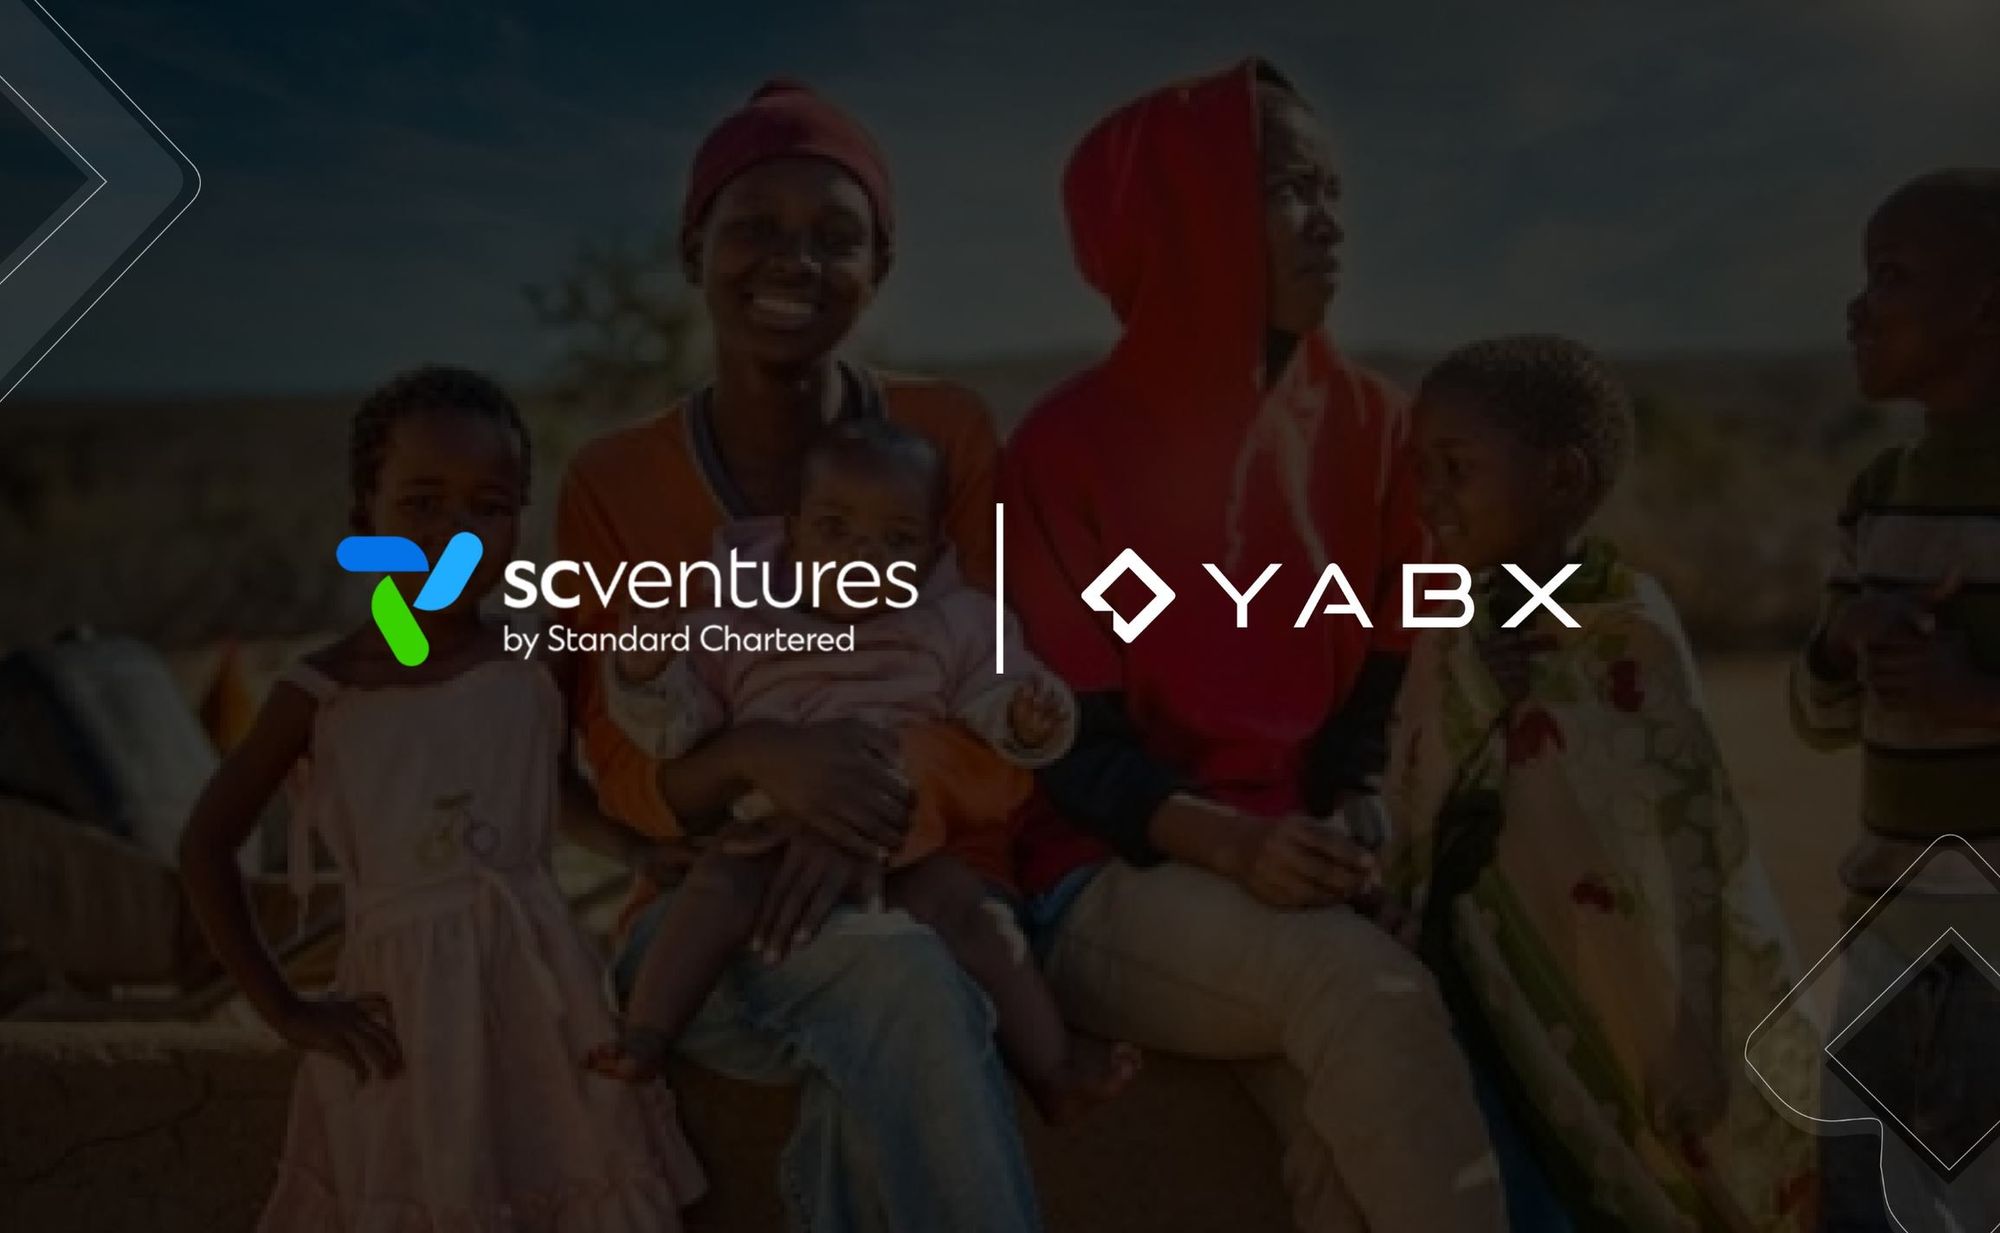 SC Ventures partners with Yabx to expand access to Financial Services in Africa